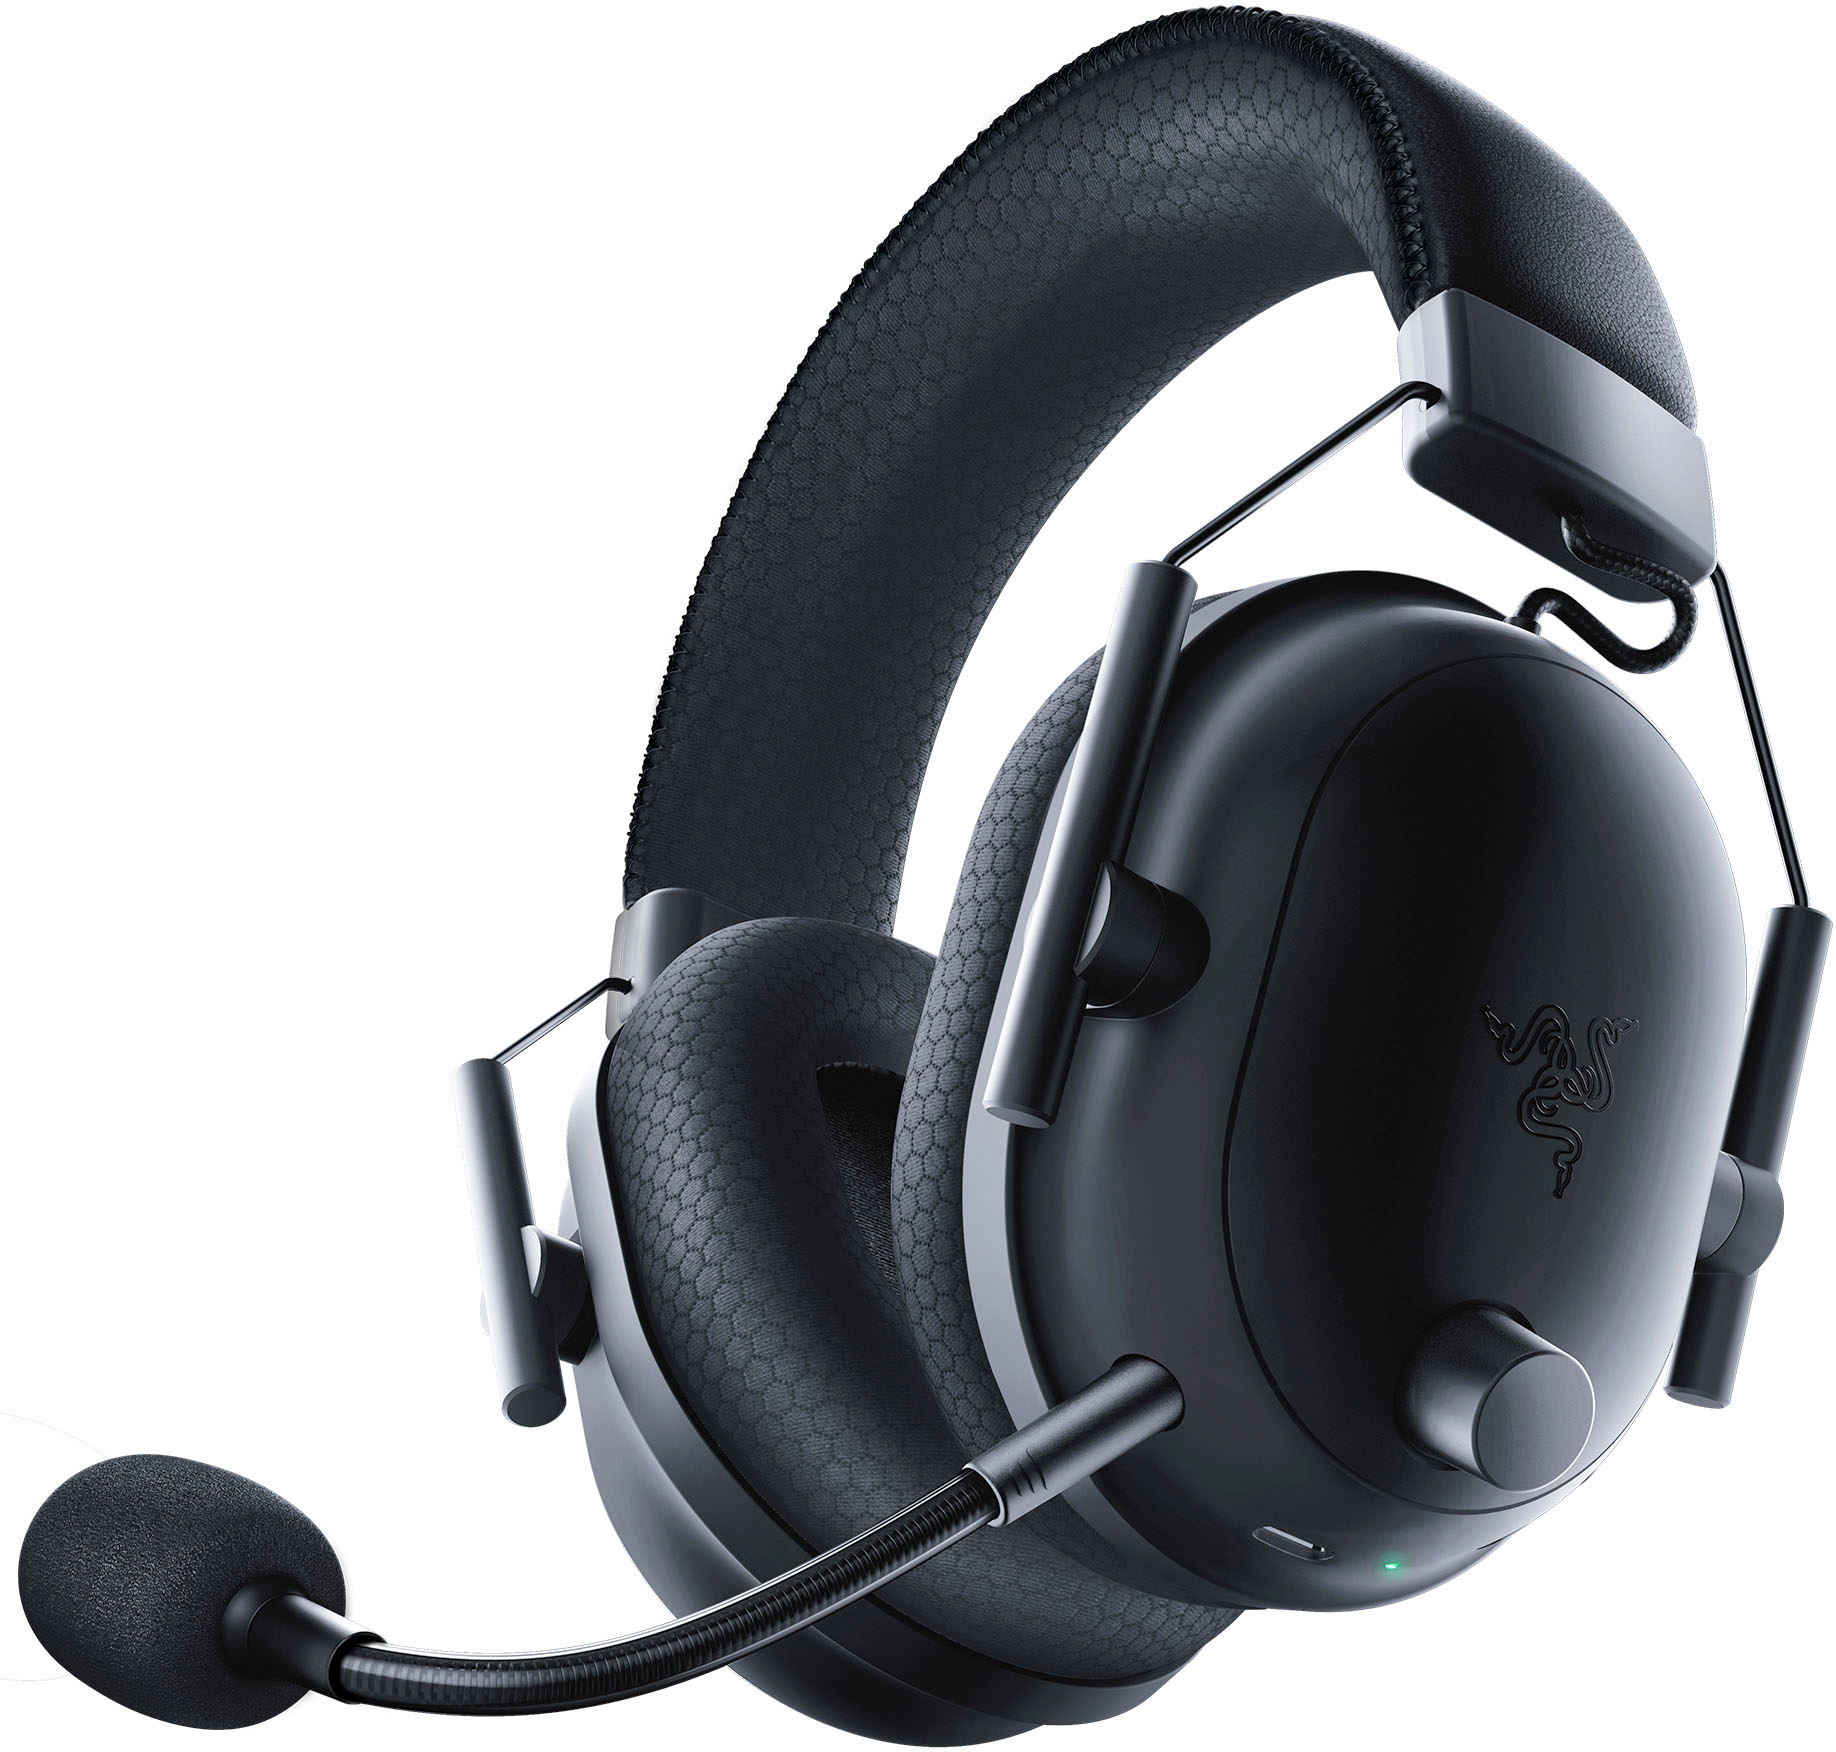 Angle View: Astro Gaming - A10 Gen 2 Wired Gaming Headset for PC - Mint